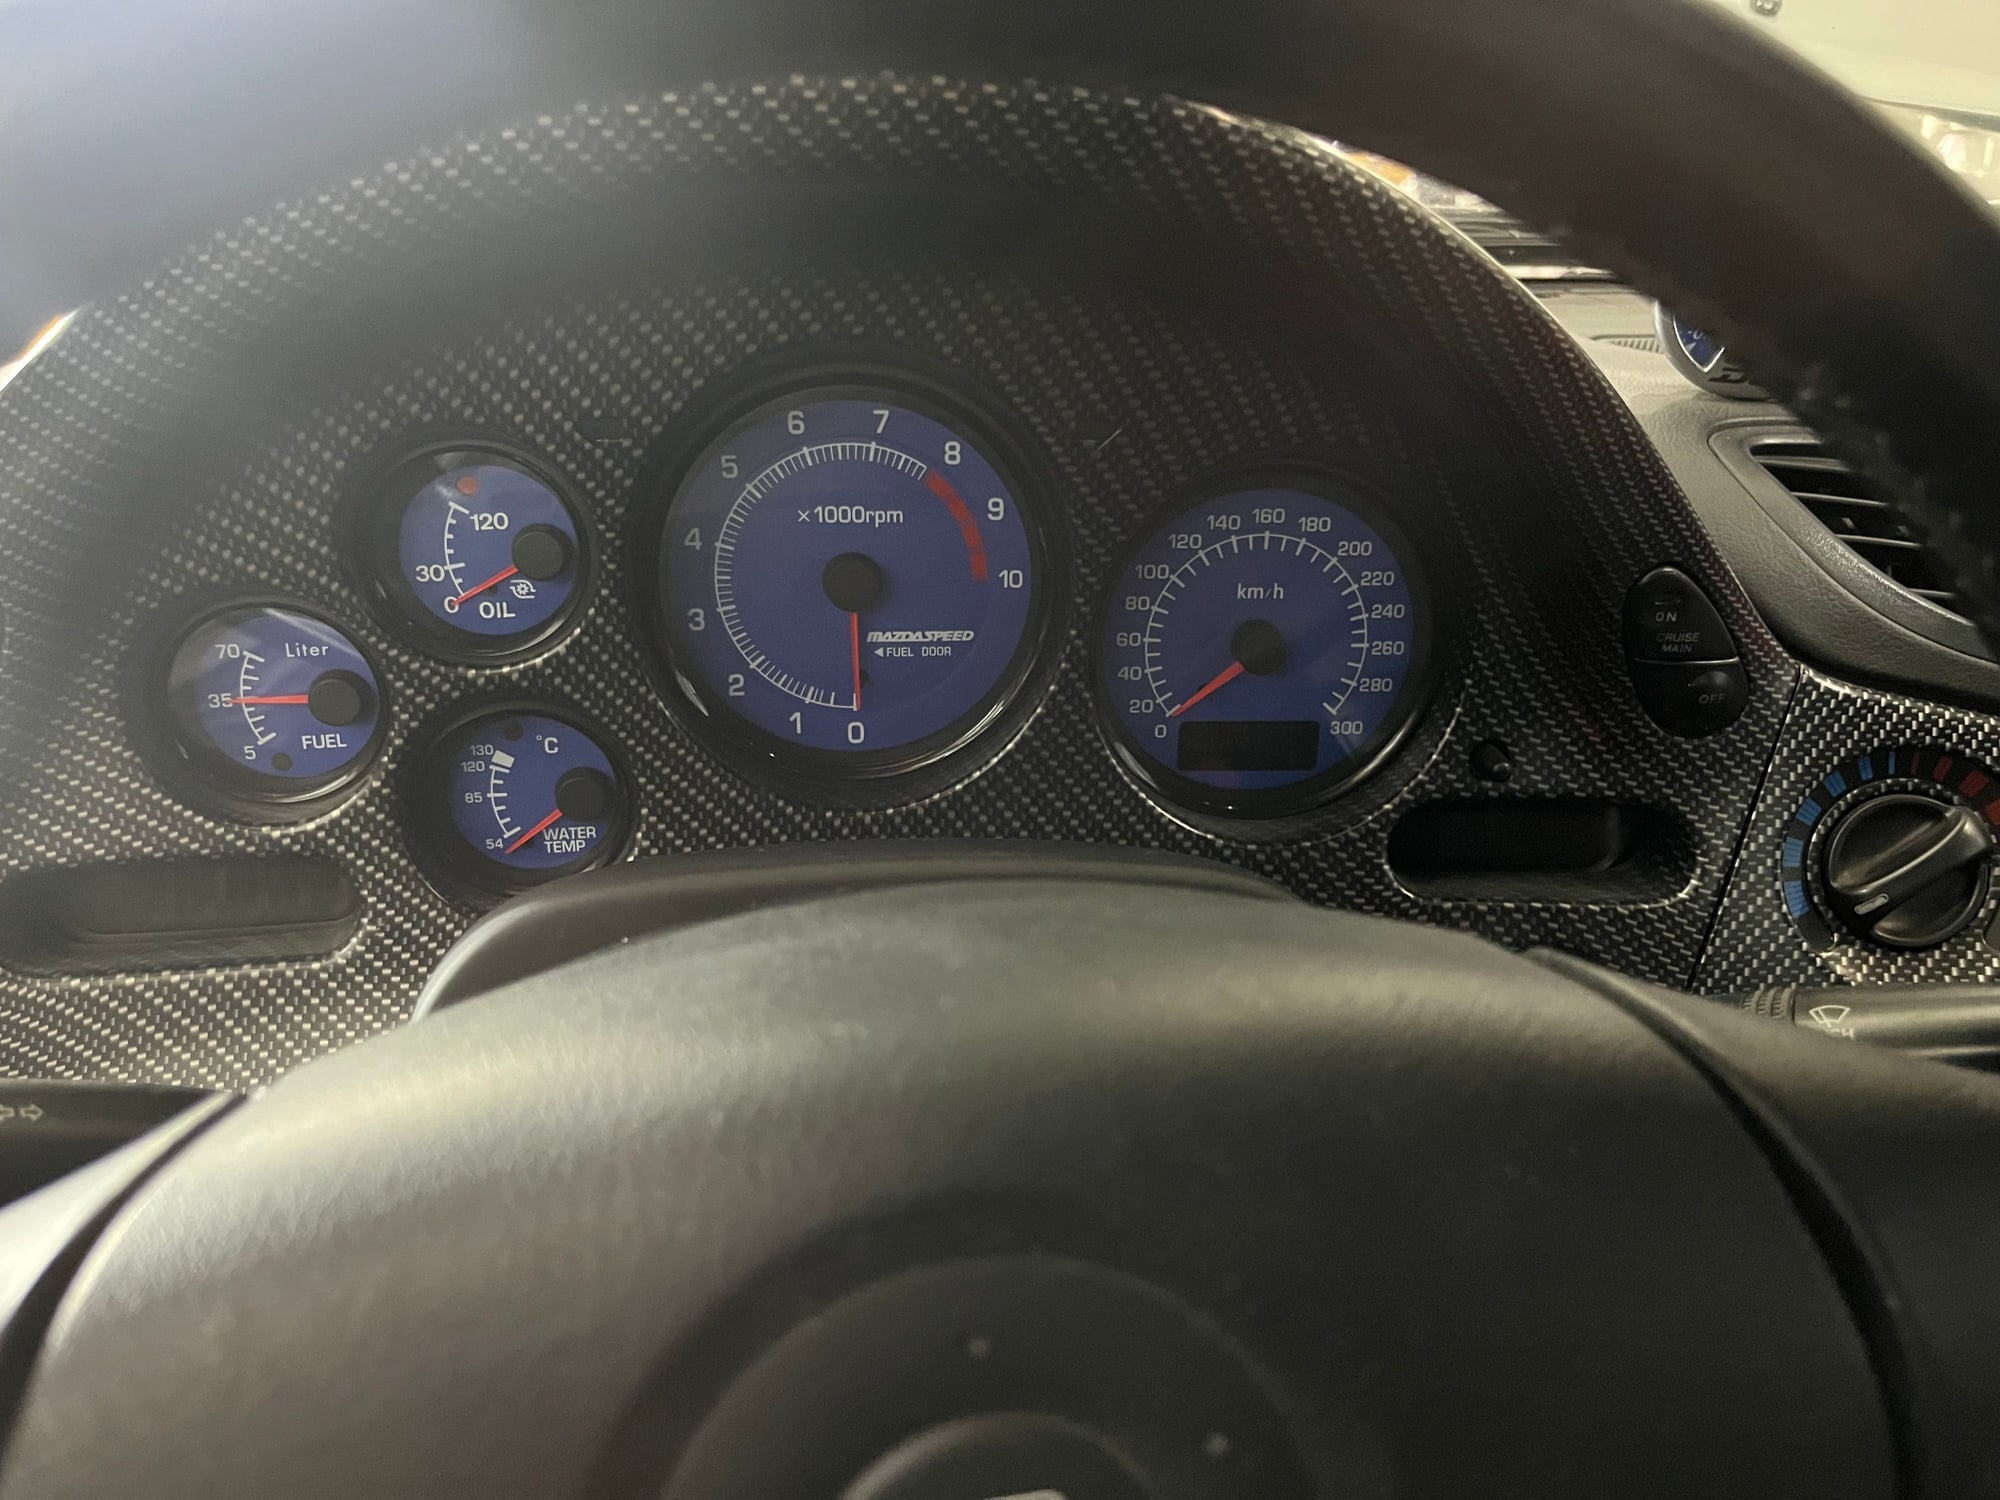 Interior/Upholstery - Mazdaspeed 300 km Blue Cluster for sale Mint - Used - 1993 to 2002 Mazda RX-7 - Miami, FL 33166, United States